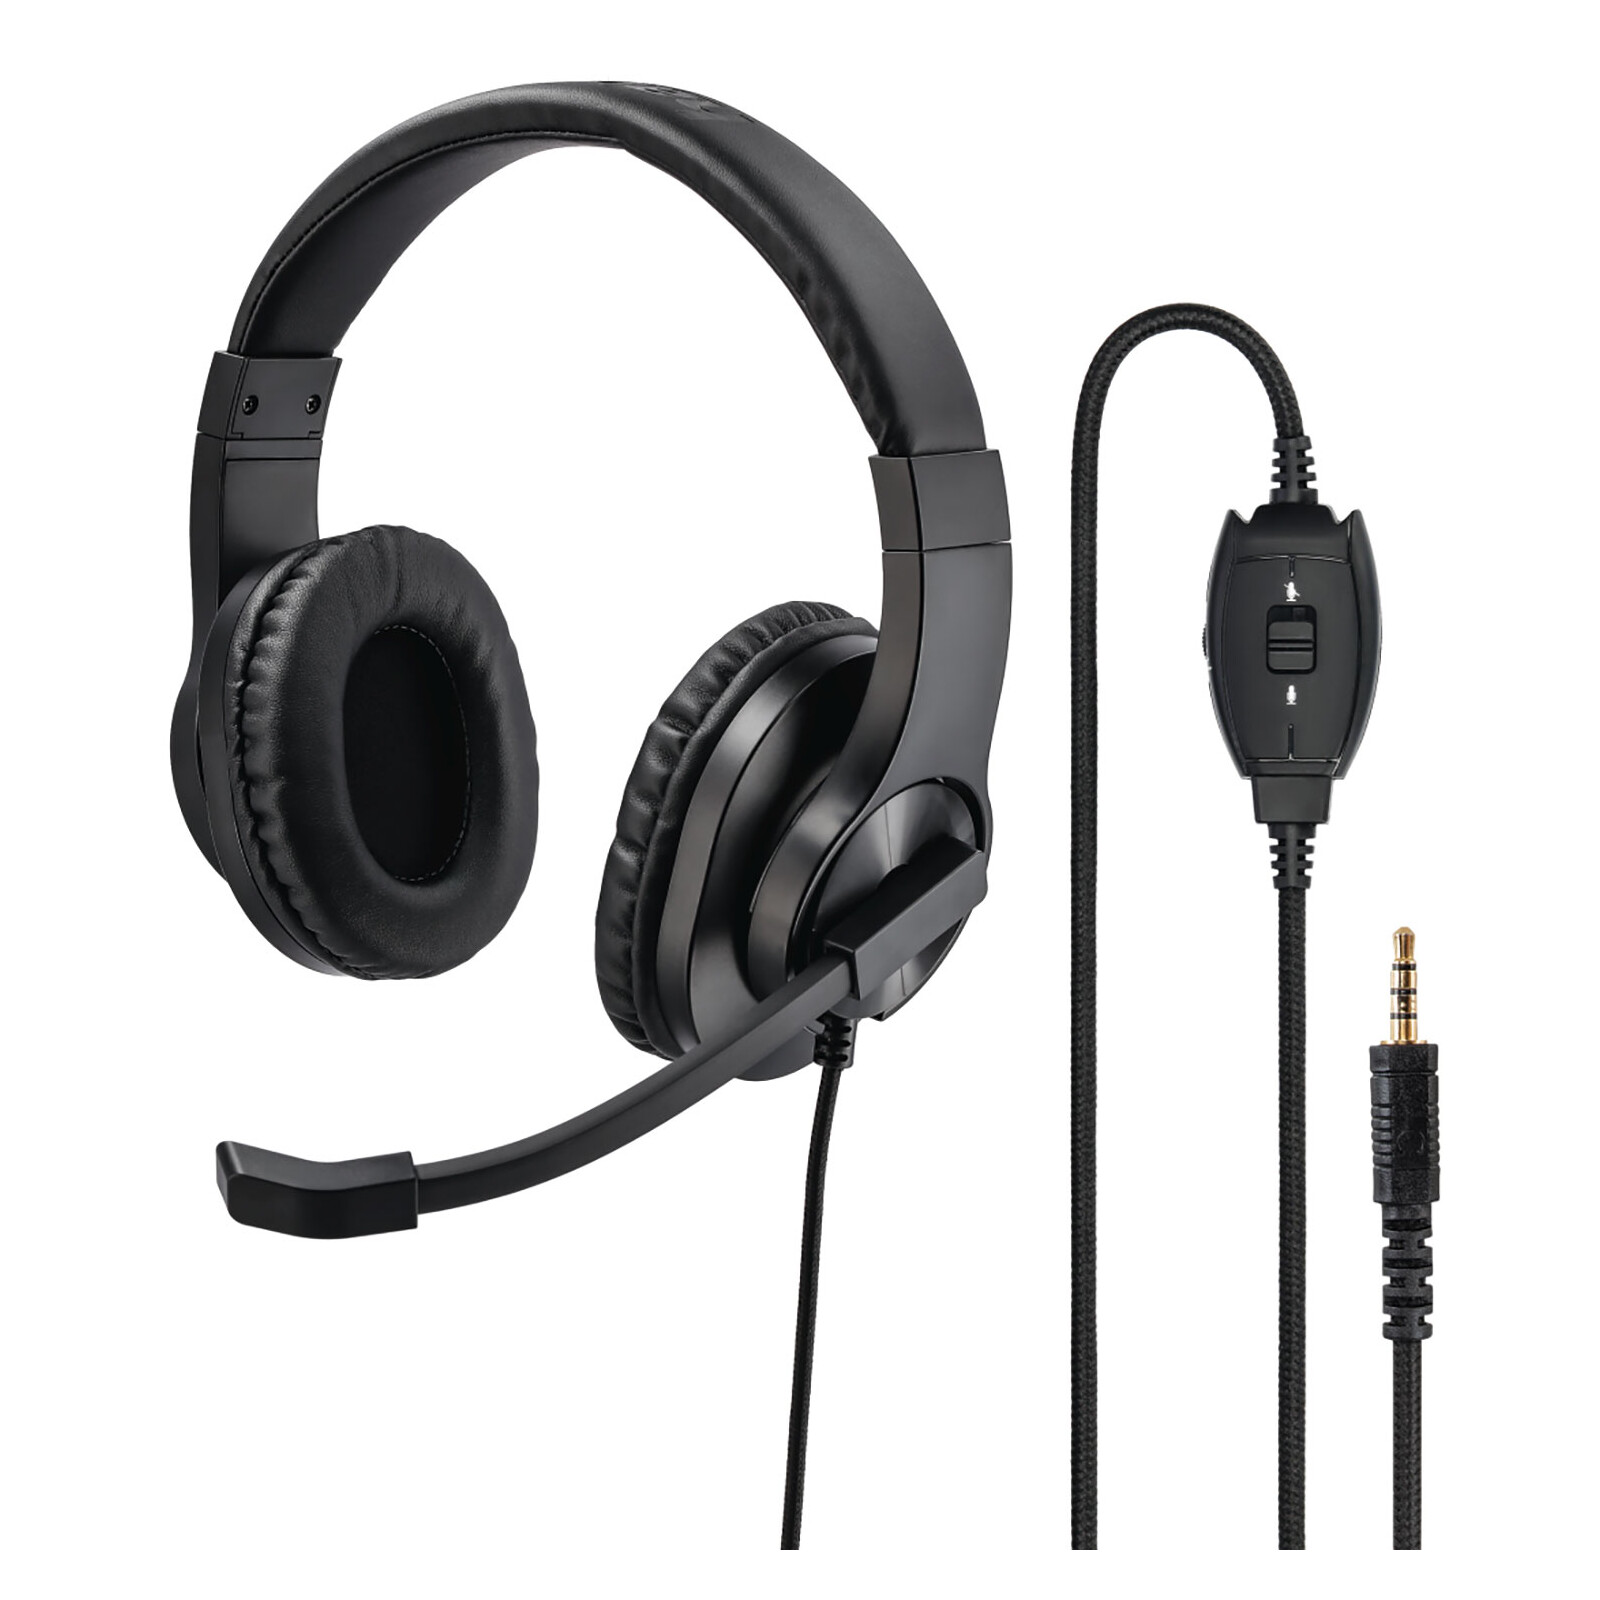 Hama 139926 PC Office Headset HS-P350 Stereo